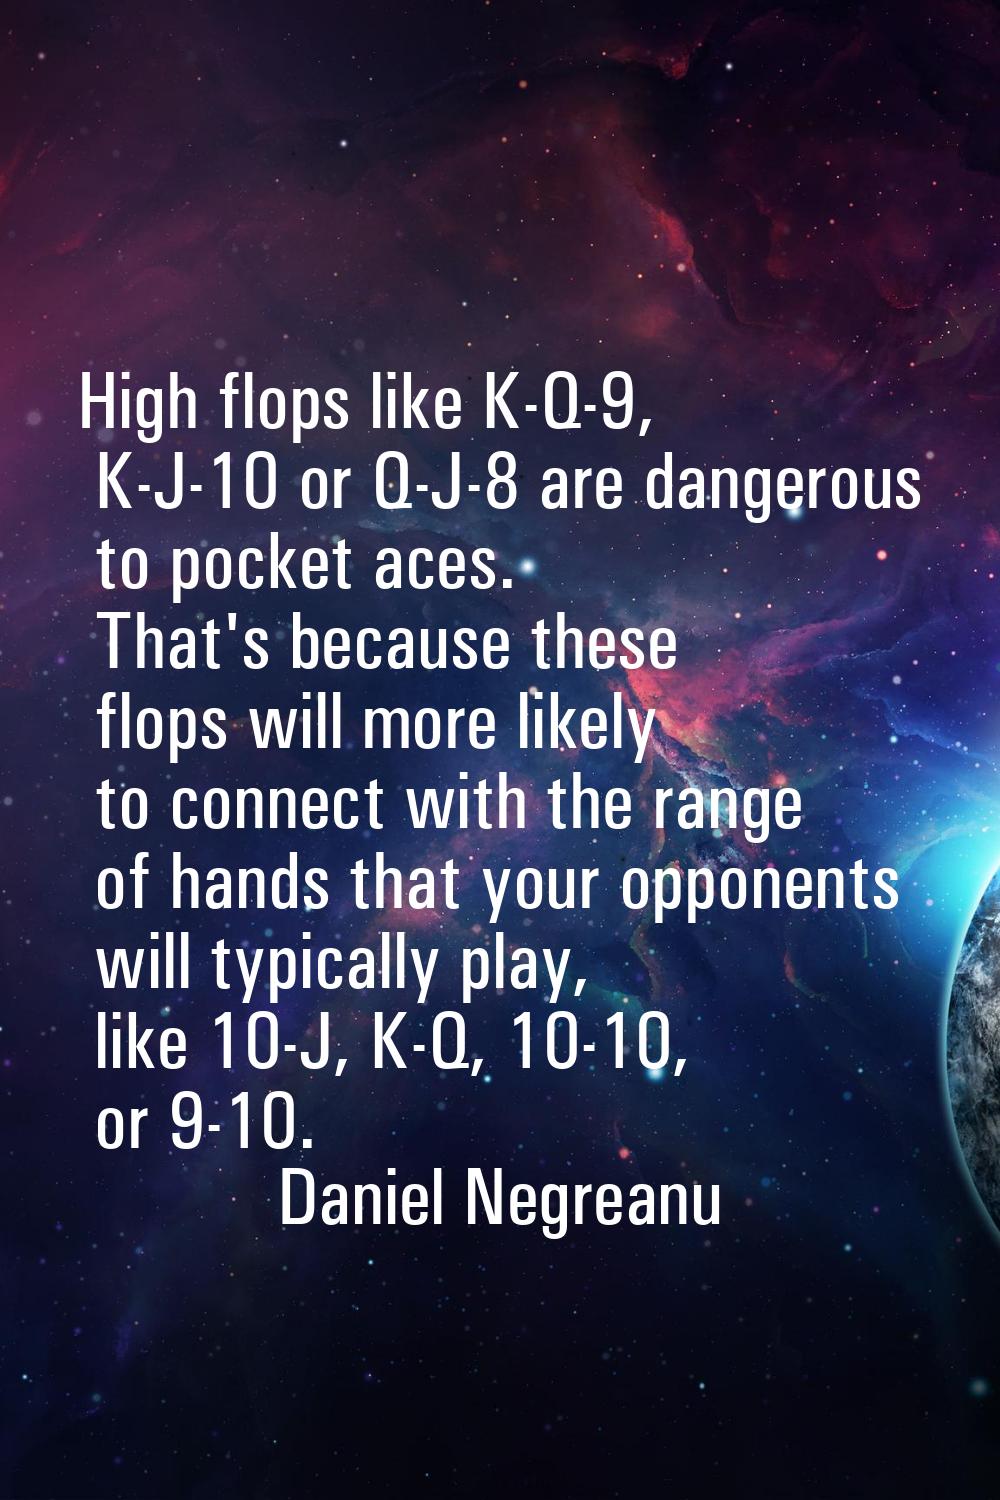 High flops like K-Q-9, K-J-10 or Q-J-8 are dangerous to pocket aces. That's because these flops wil